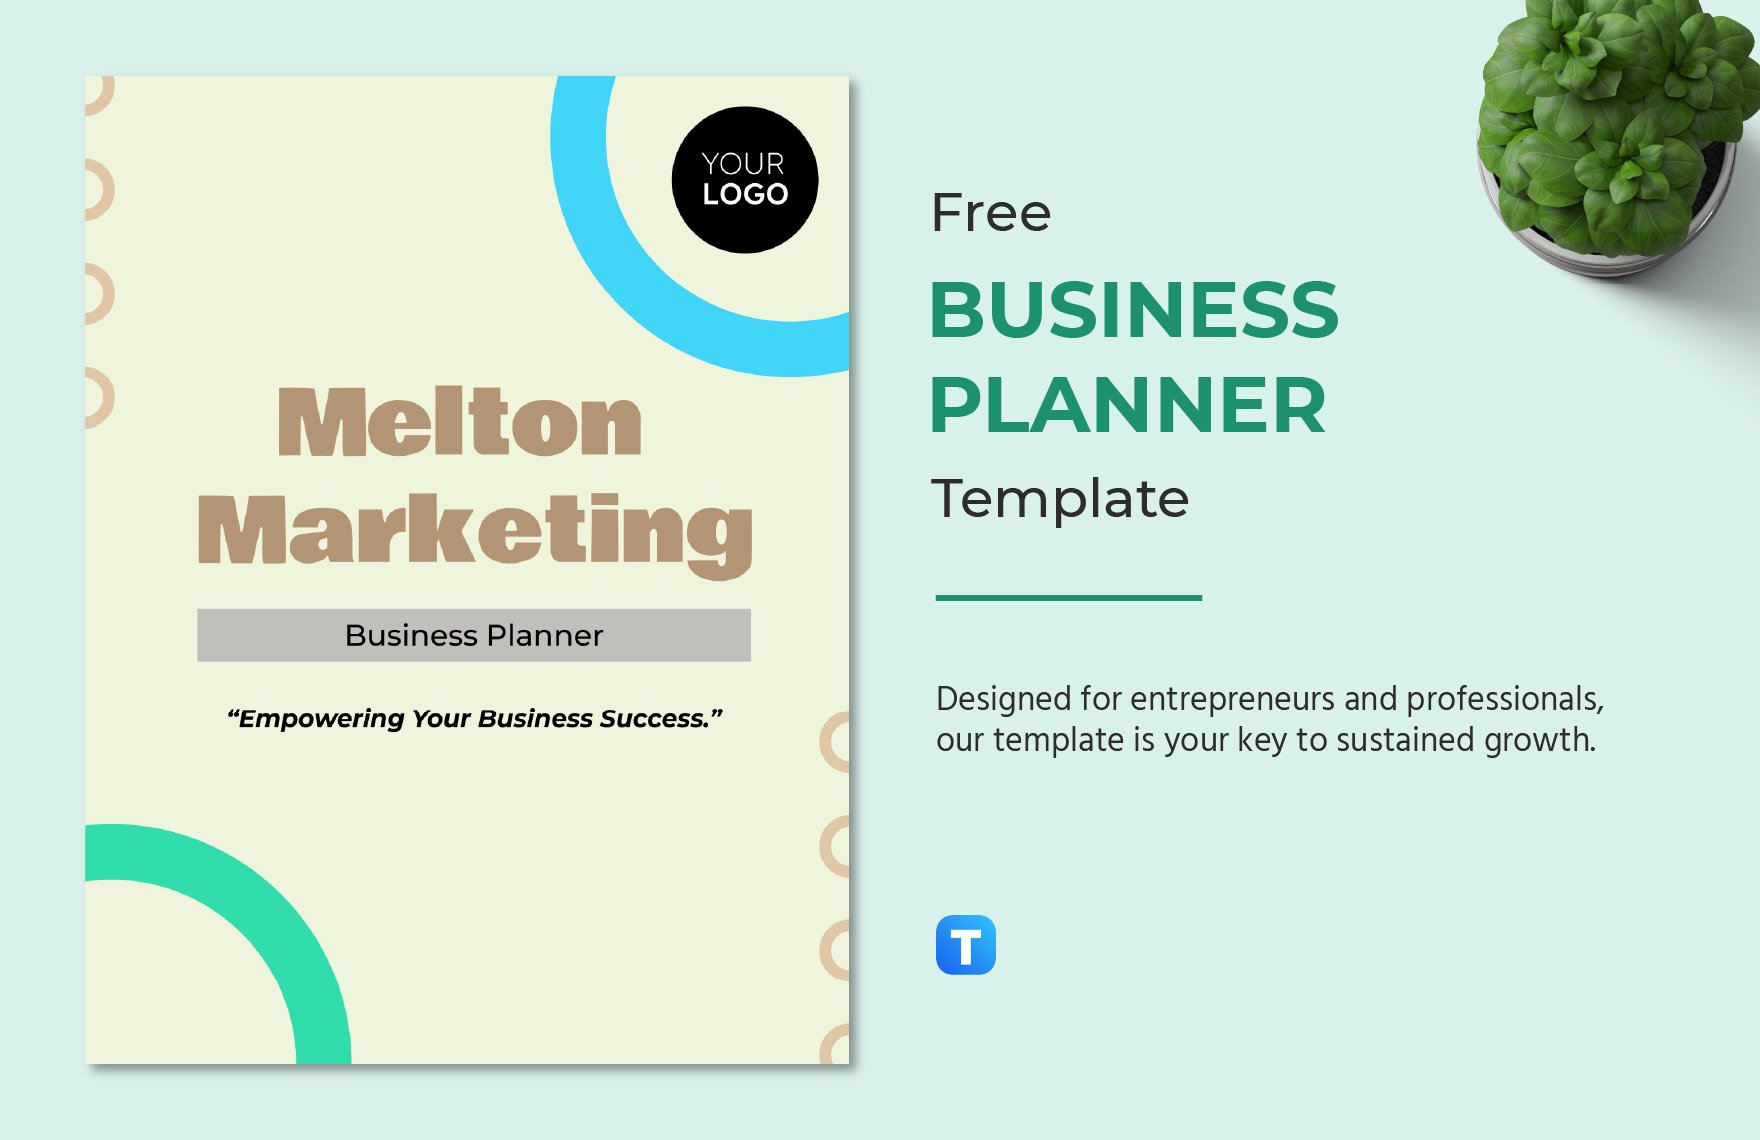 Free Business Planner Template